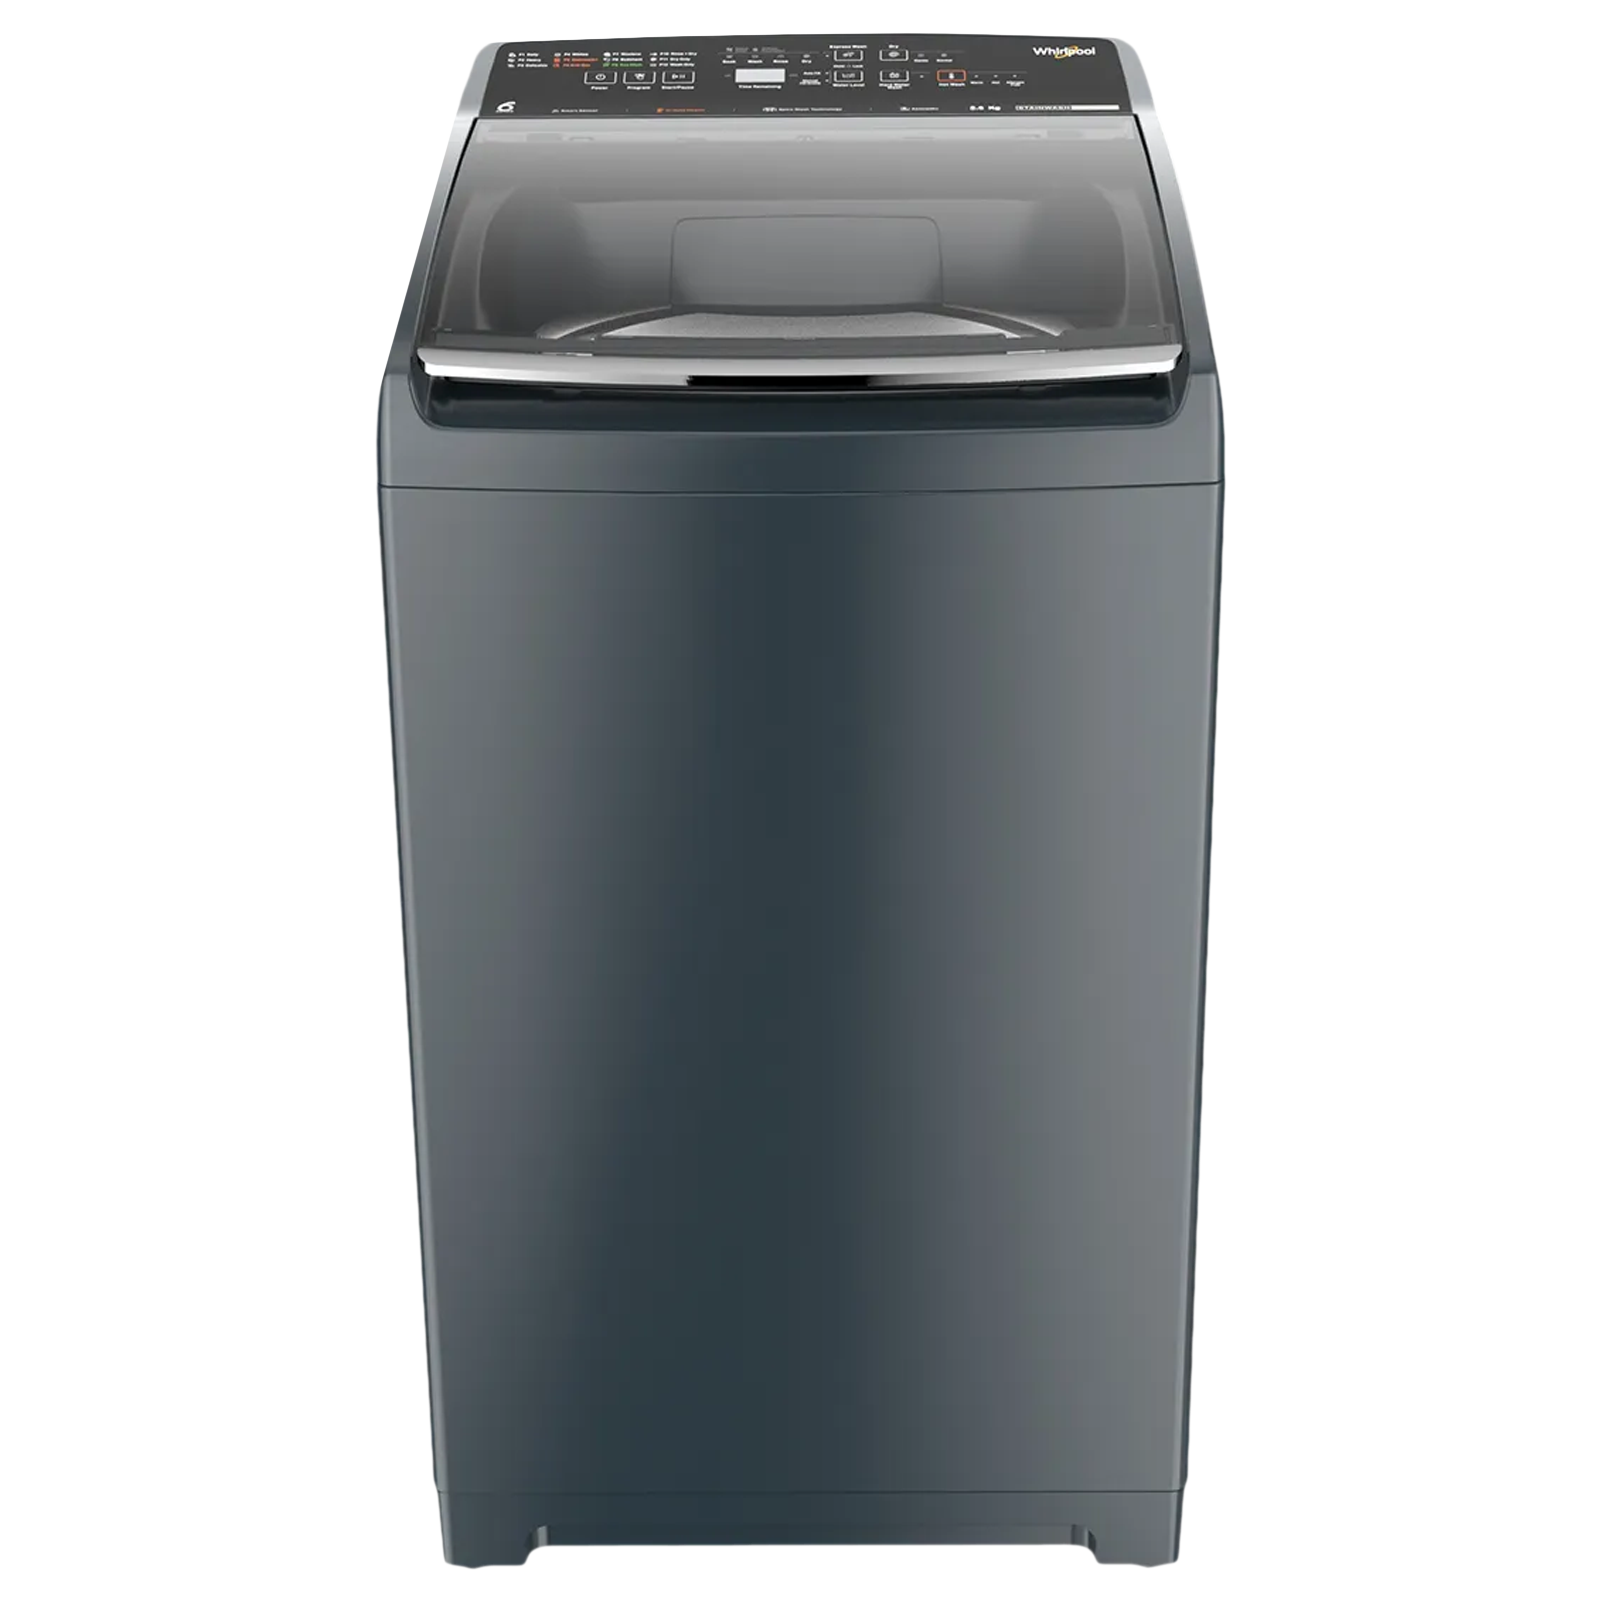 Whirlpool 8.5 kg 5 Star Fully Automatic Top Load Washing Machine (Stainwash Pro Plus, In-built Heater, Midnight Grey)